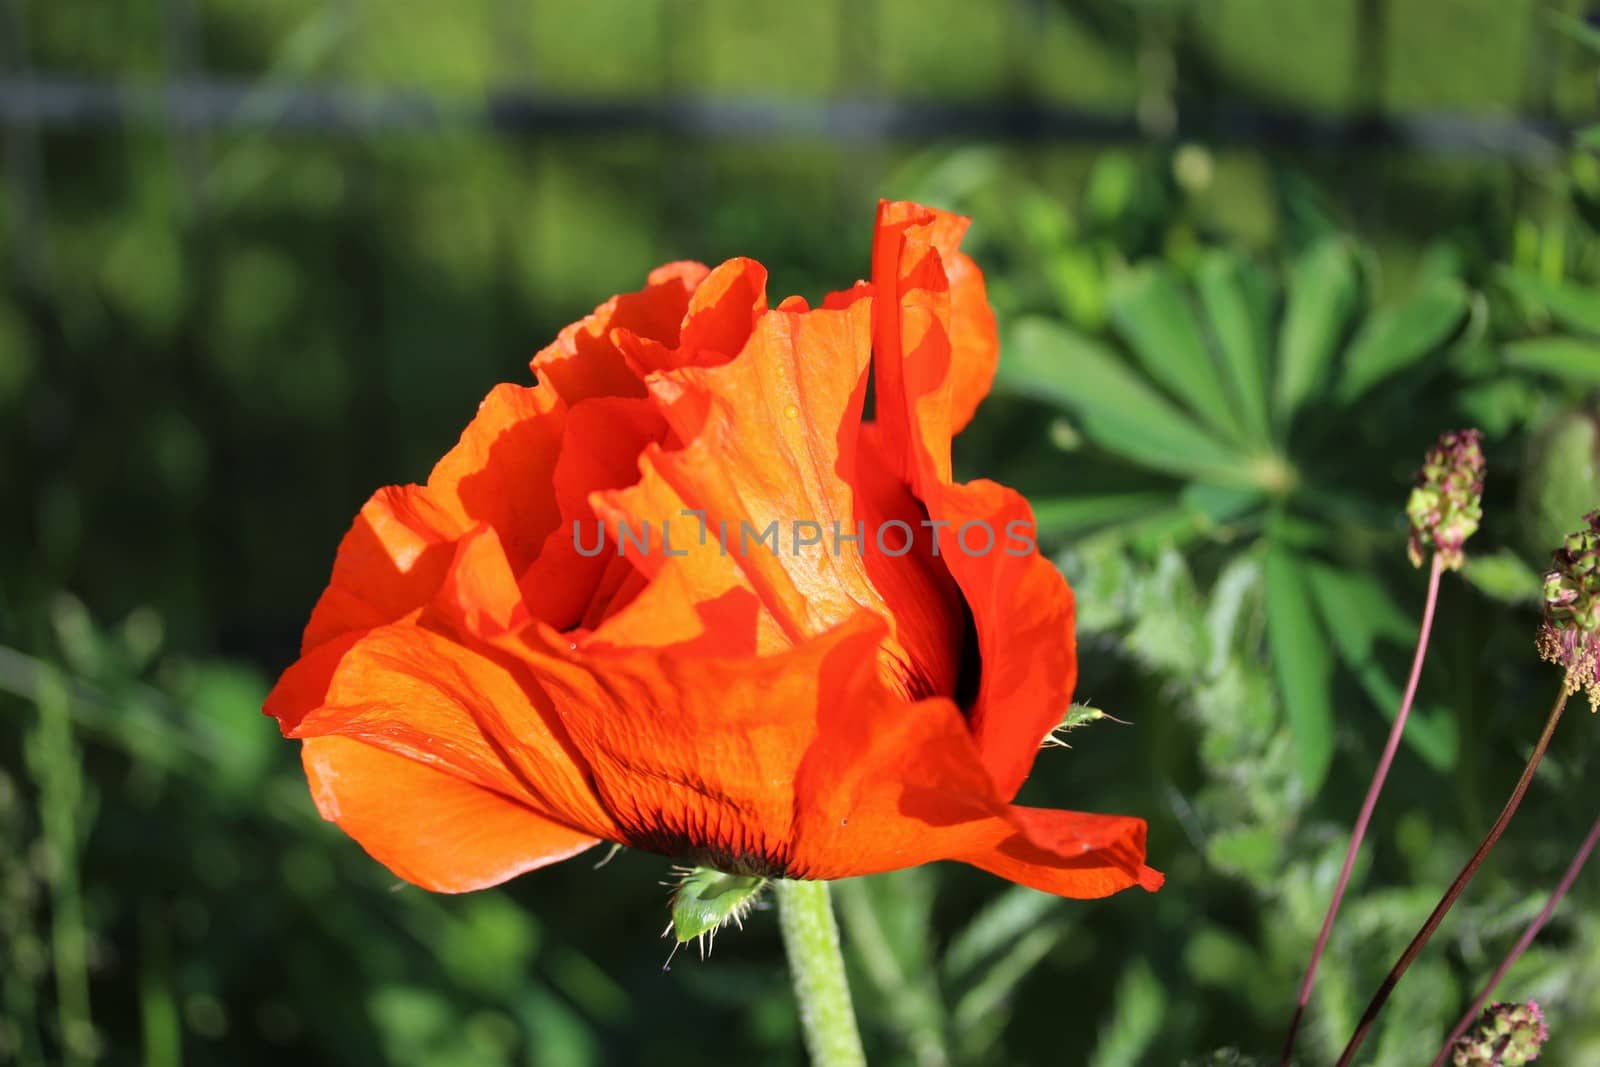 A red poppy flower against a green background by Luise123